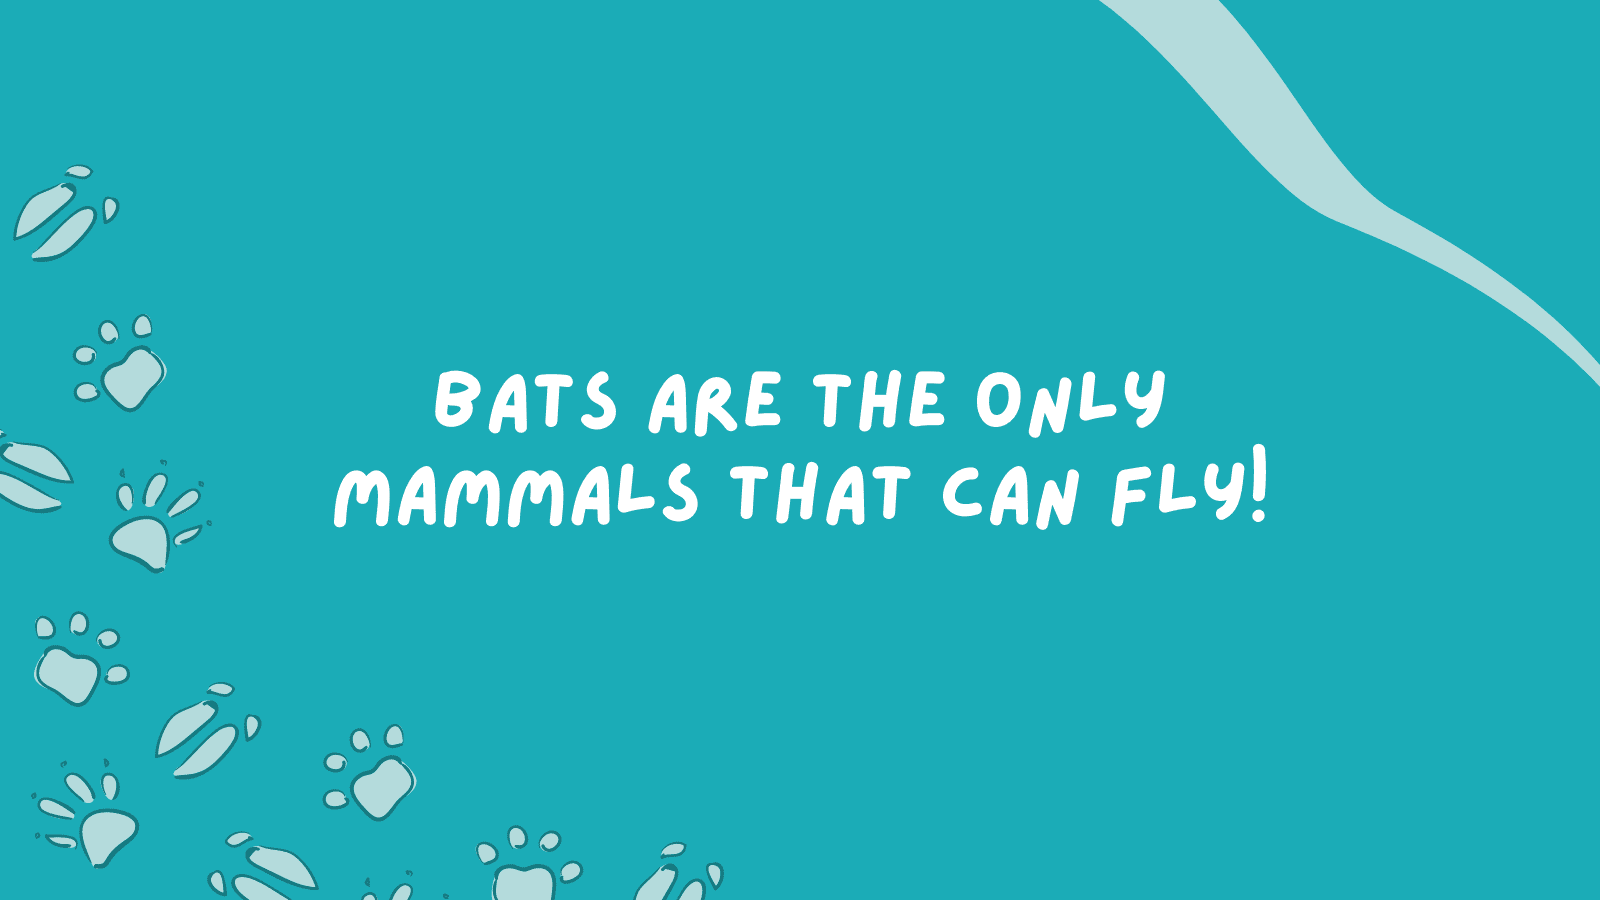 51 Amazing Animal Facts To Share With Kids